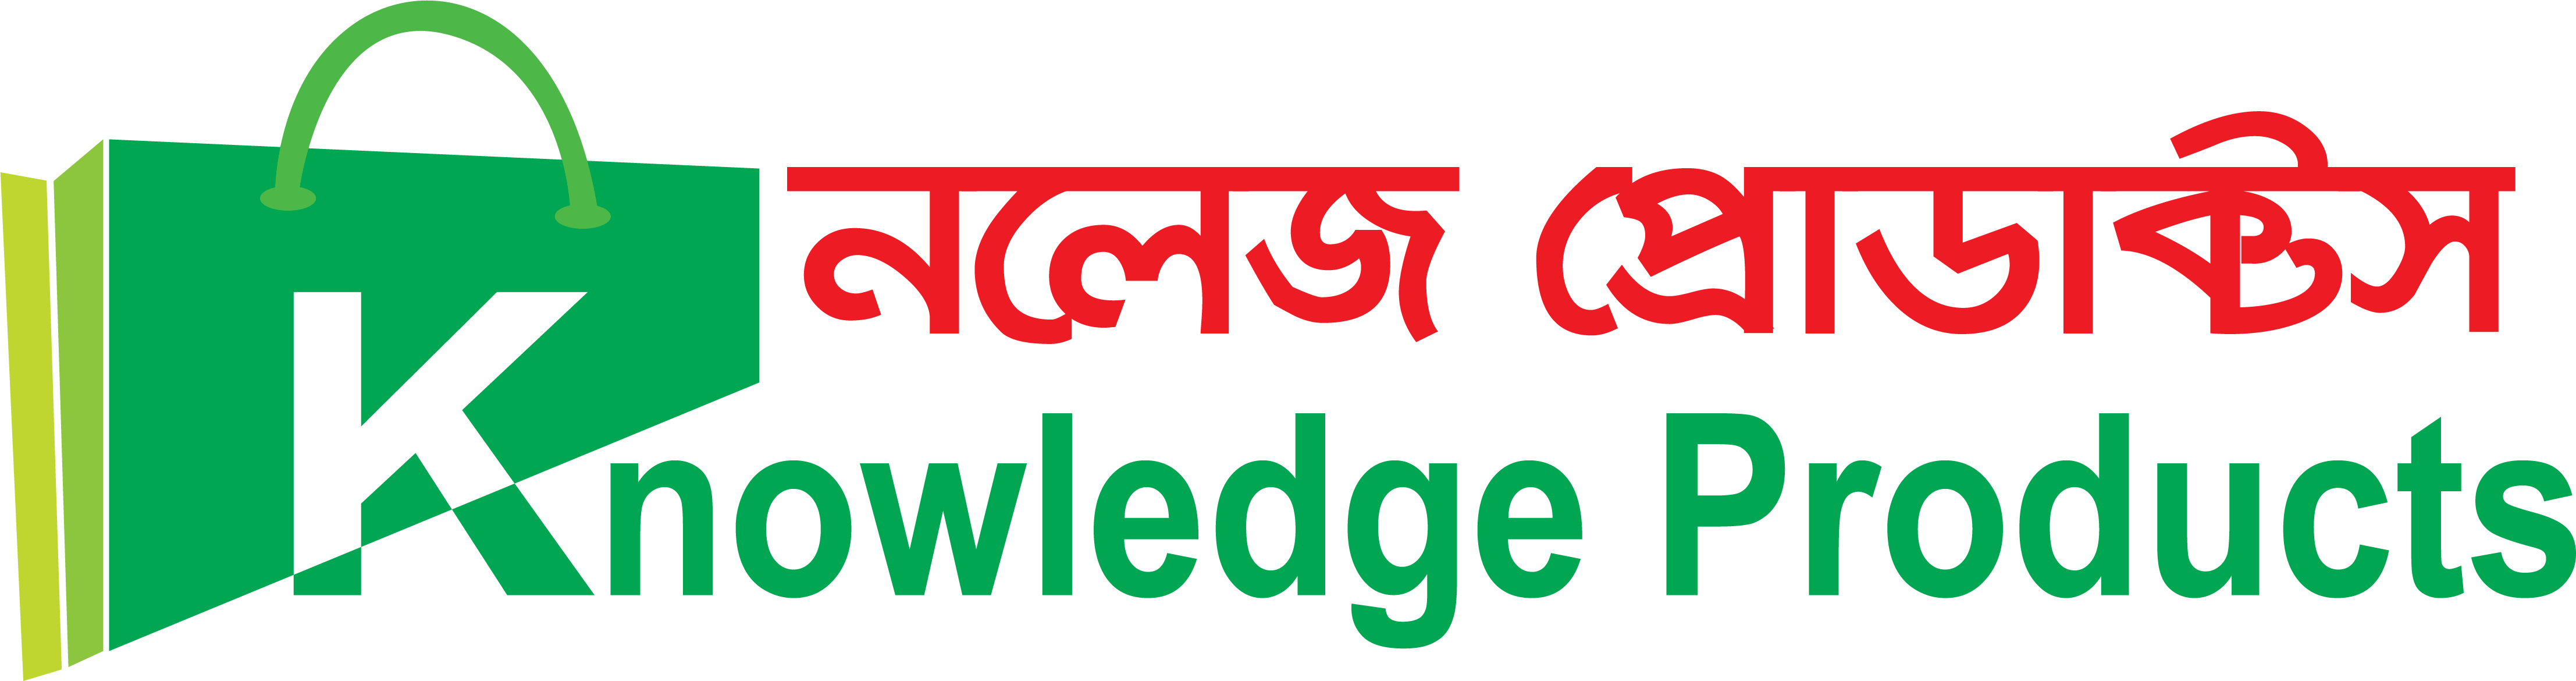 knowledge products logo